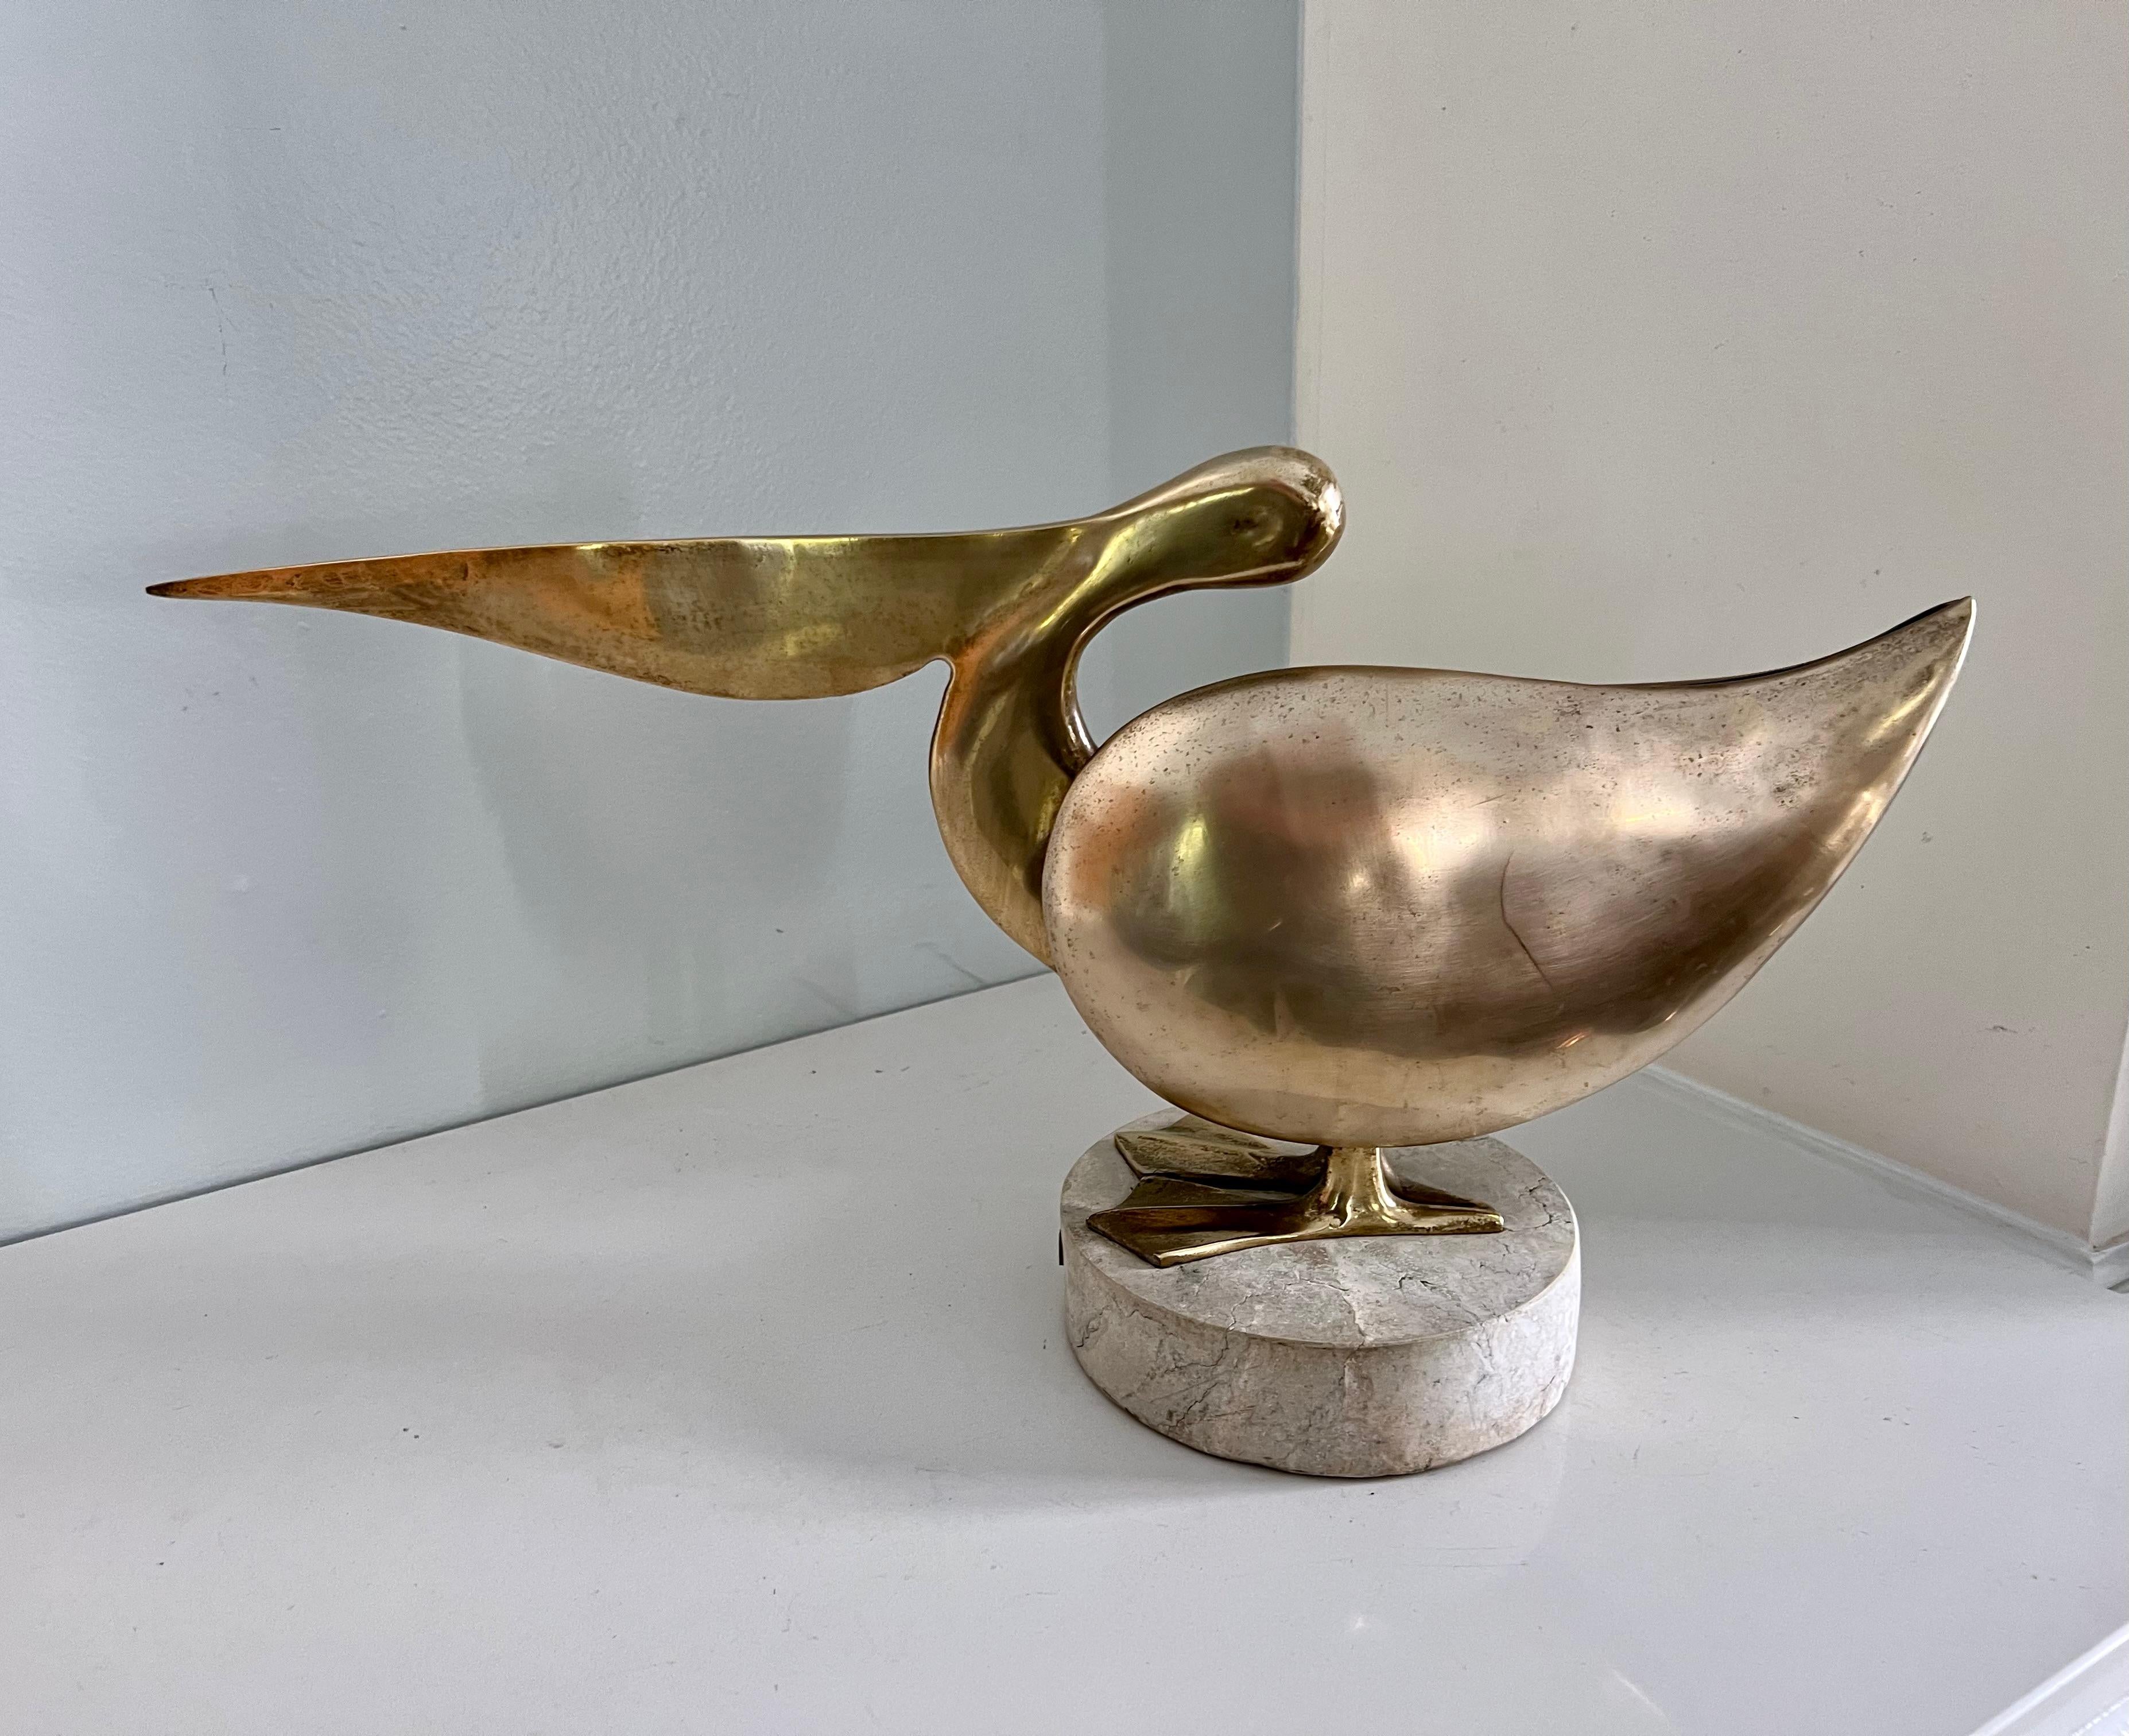 Unique golden brass pelican statue on marble base by artist Bijan. This piece is from the artist's series of 